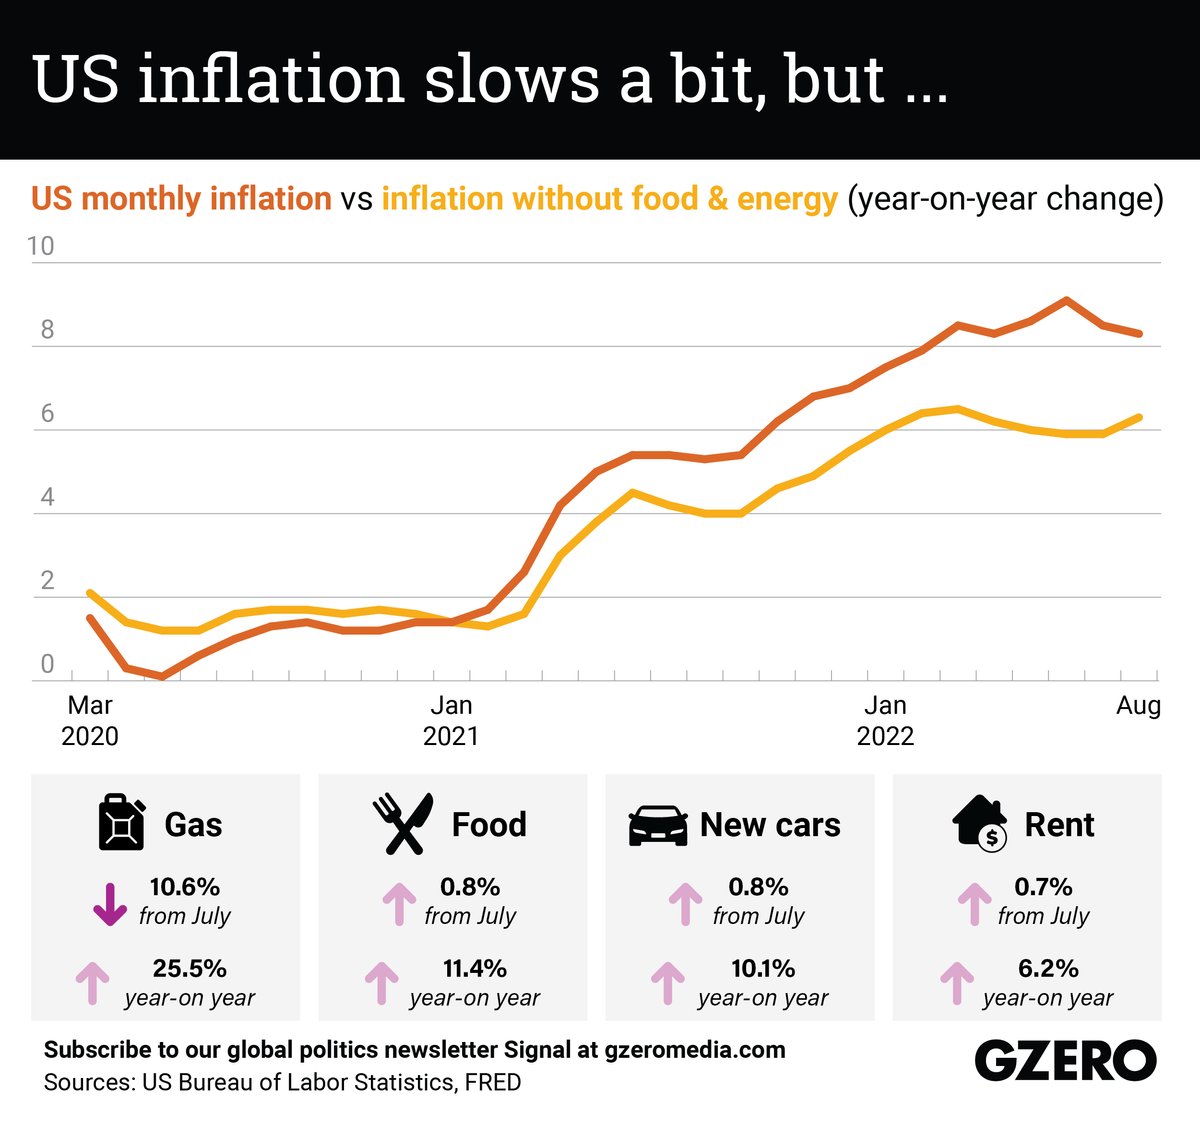 The Graphic Truth: US inflation slows a bit, but ...